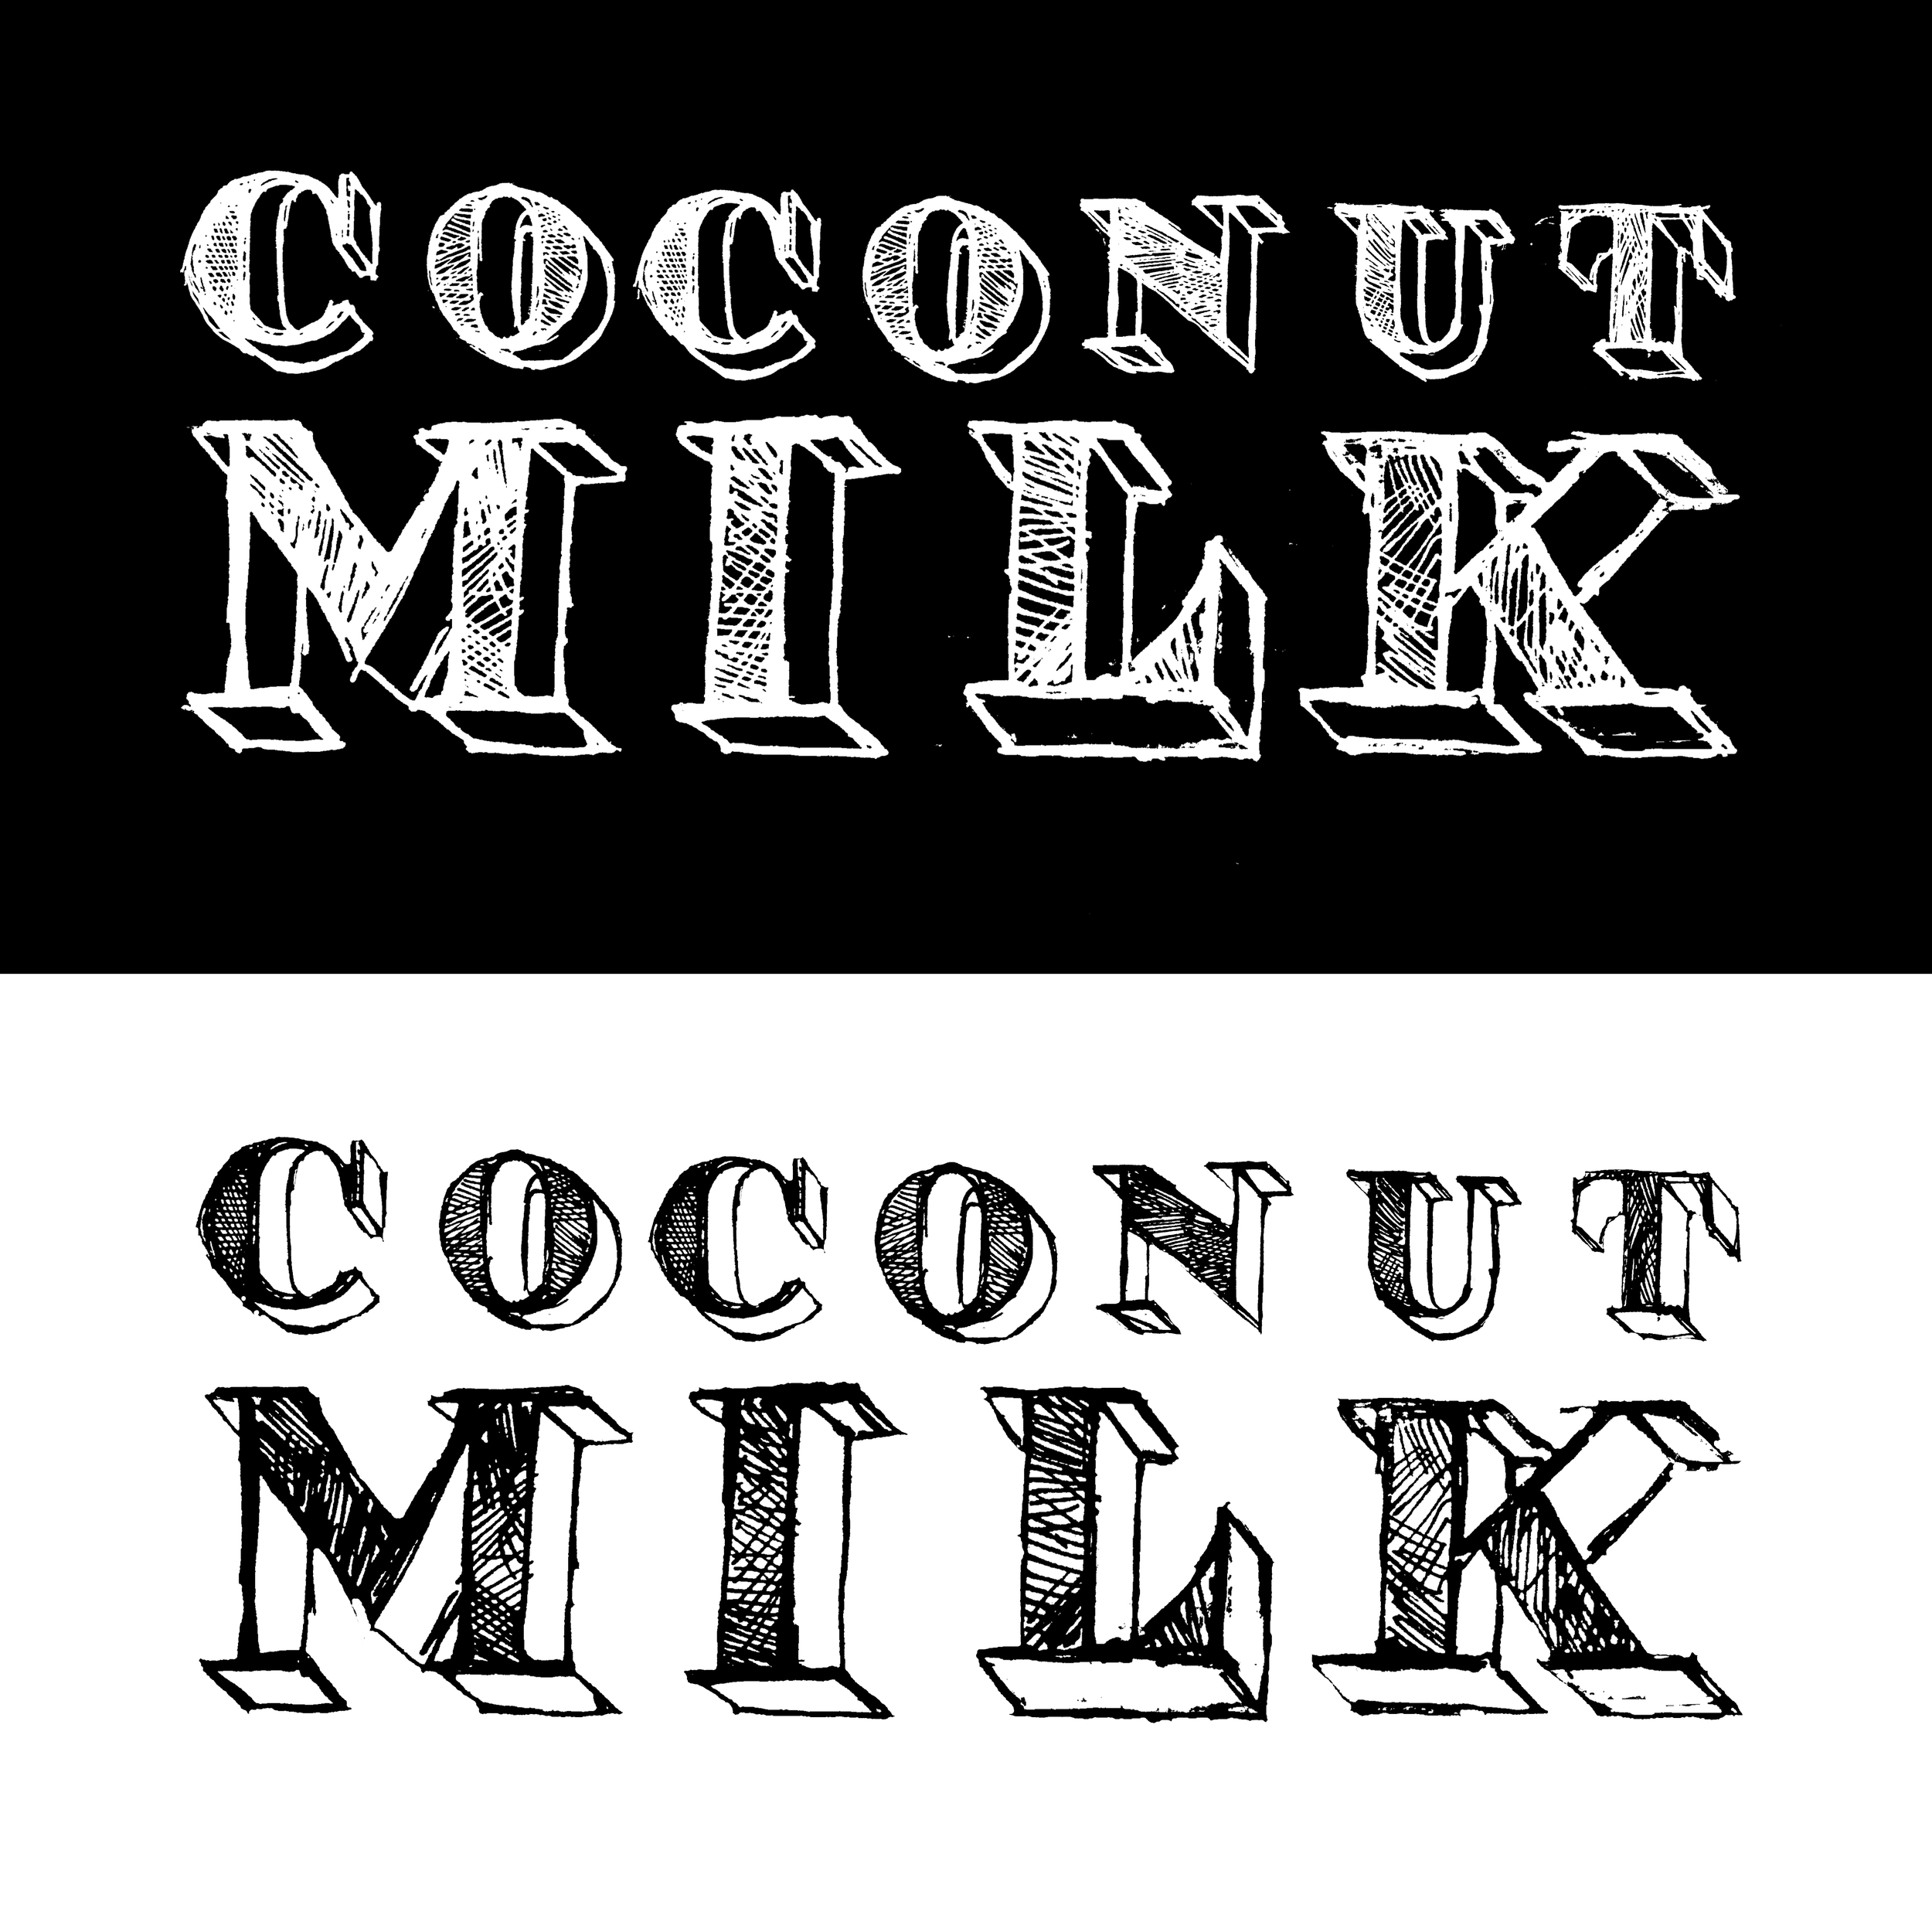  Coconut Milk is a promising new indie rock act from Cincinnati, Ohio. Their main branding is the work of another local artist but I was commissioned for a logo that was modest and somewhat formal but while still being sketchy and playful. &nbsp;Paul